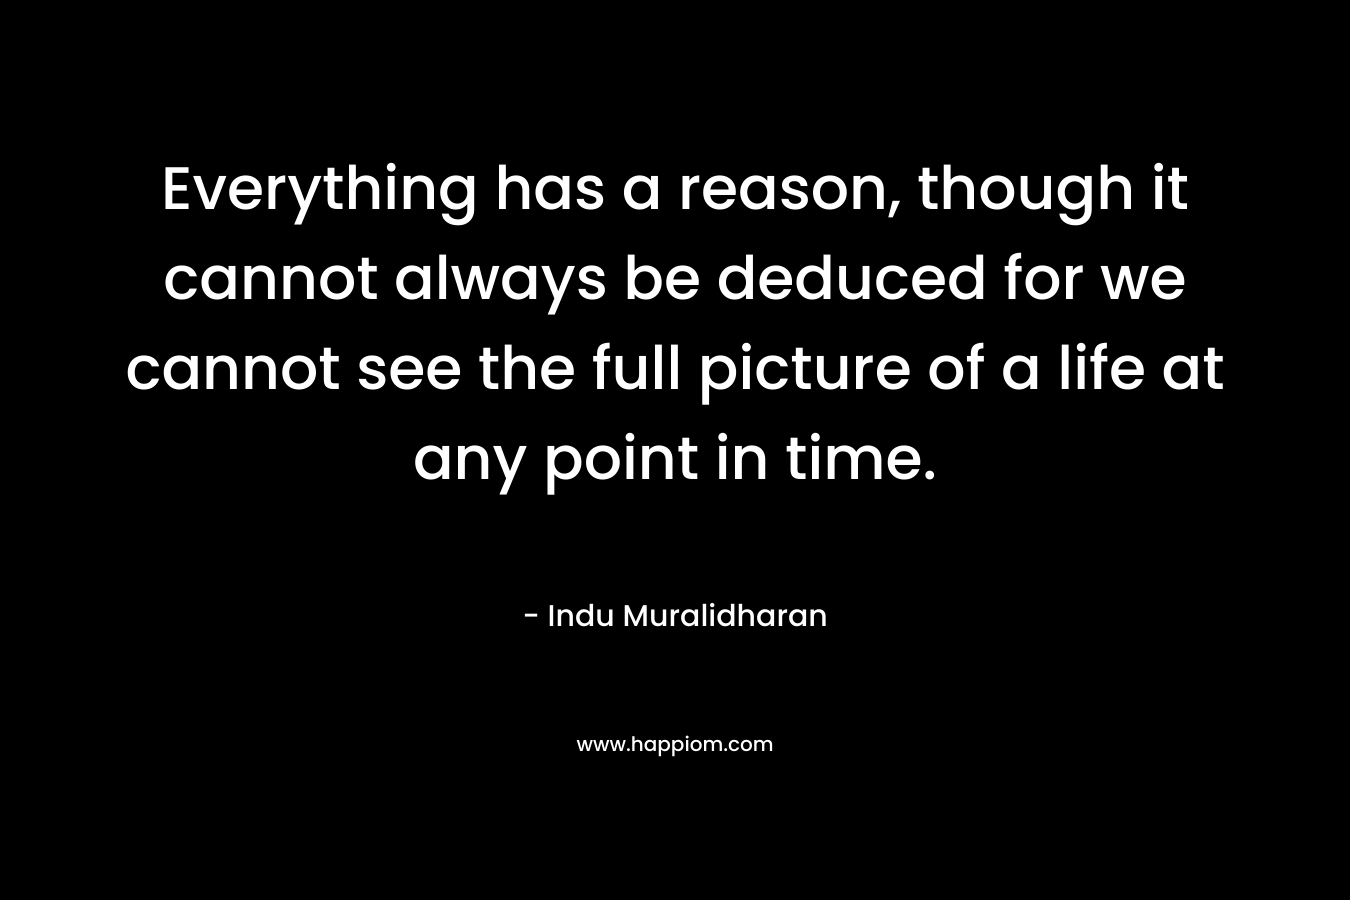 Everything has a reason, though it cannot always be deduced for we cannot see the full picture of a life at any point in time.